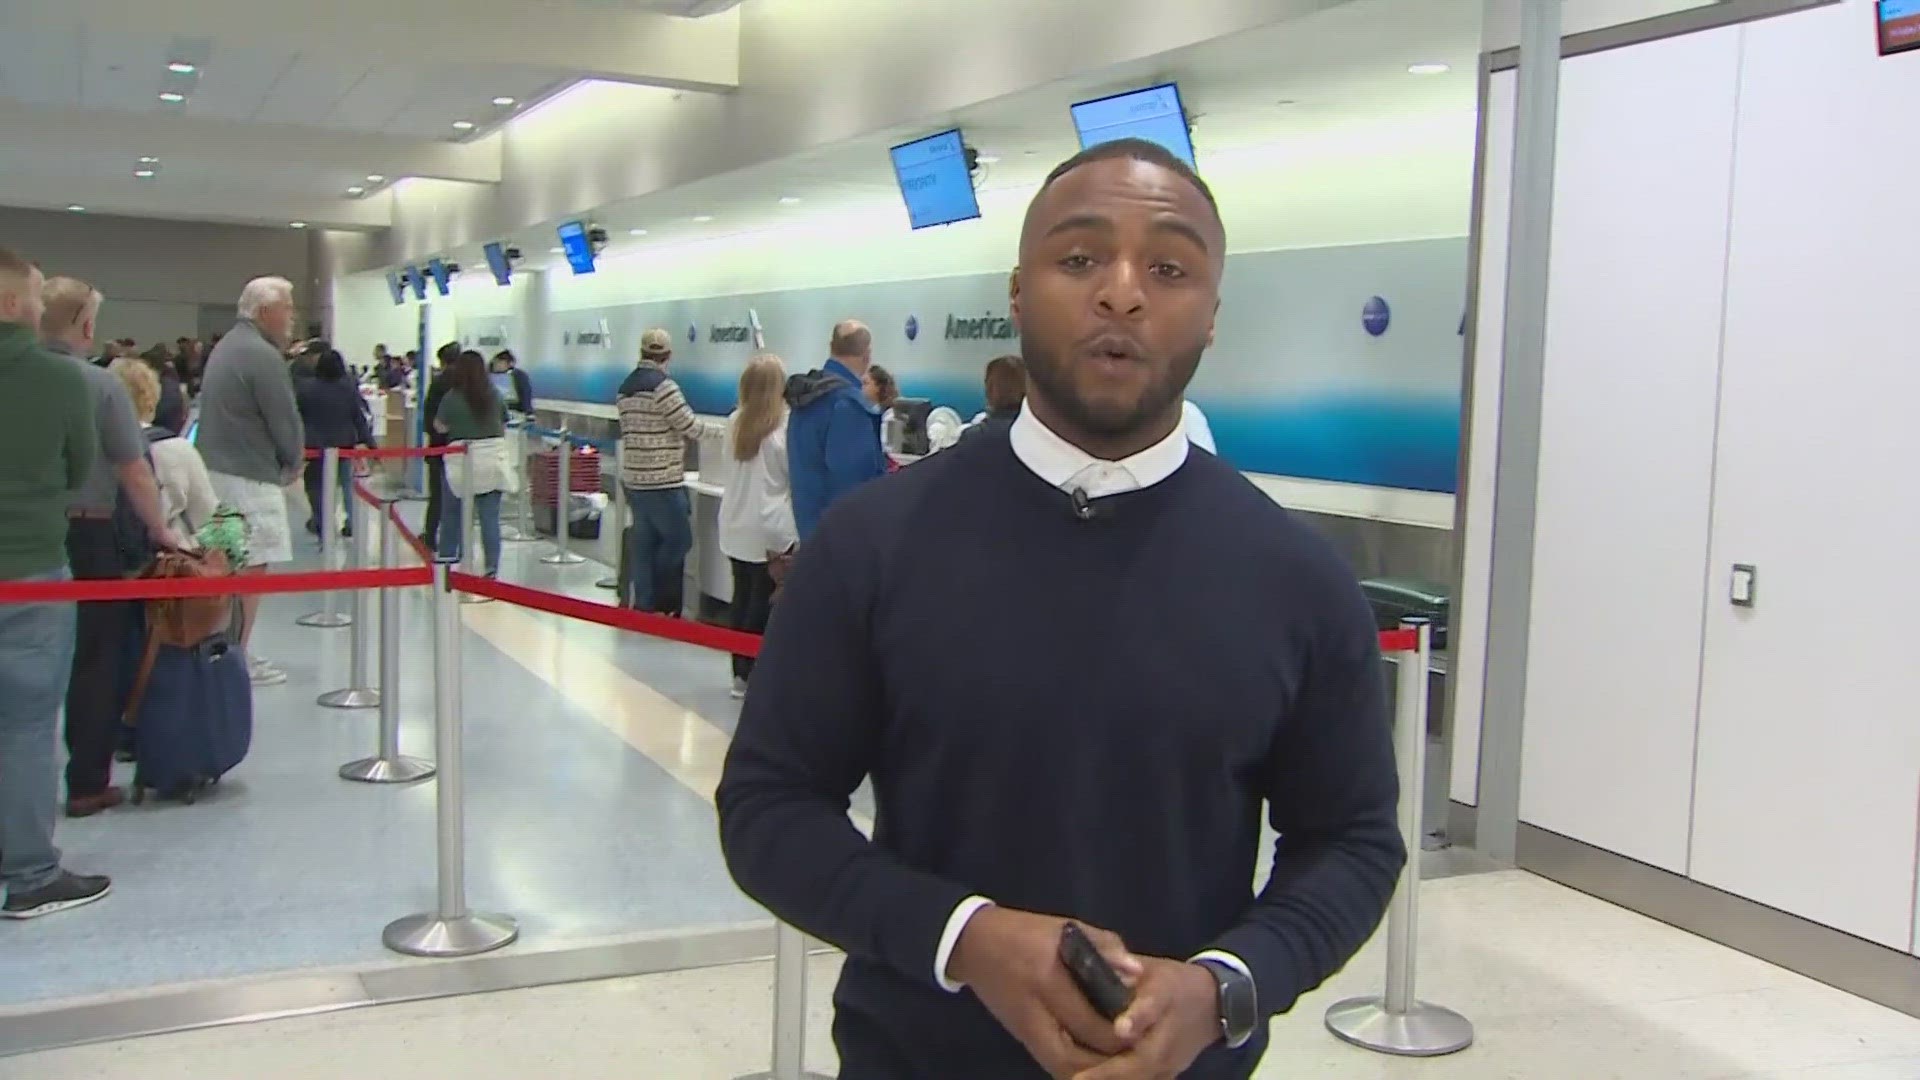 WFAA's Richard Solomon was at DFW Airport as spring break travel crowds picked up.